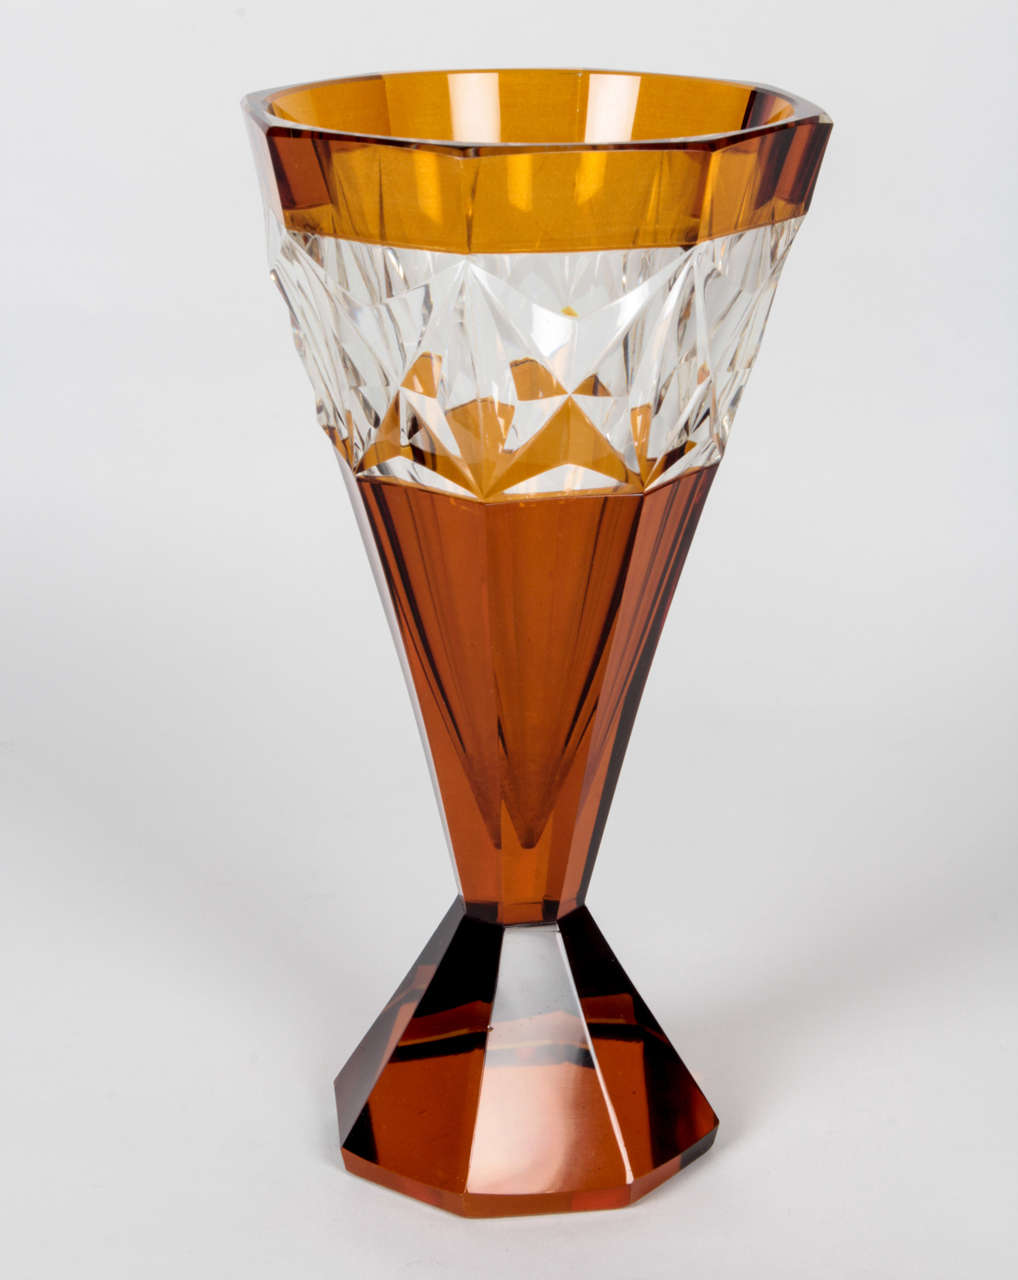 CZECH CUBISM / ART DECO 

Panel-cut vase   c. 1912-25	

Clear cut lead crystal with amber overlay in conical form with a band of chevron cut designs around the upper third; the conical form above a flaring, paneled foot 

For more information